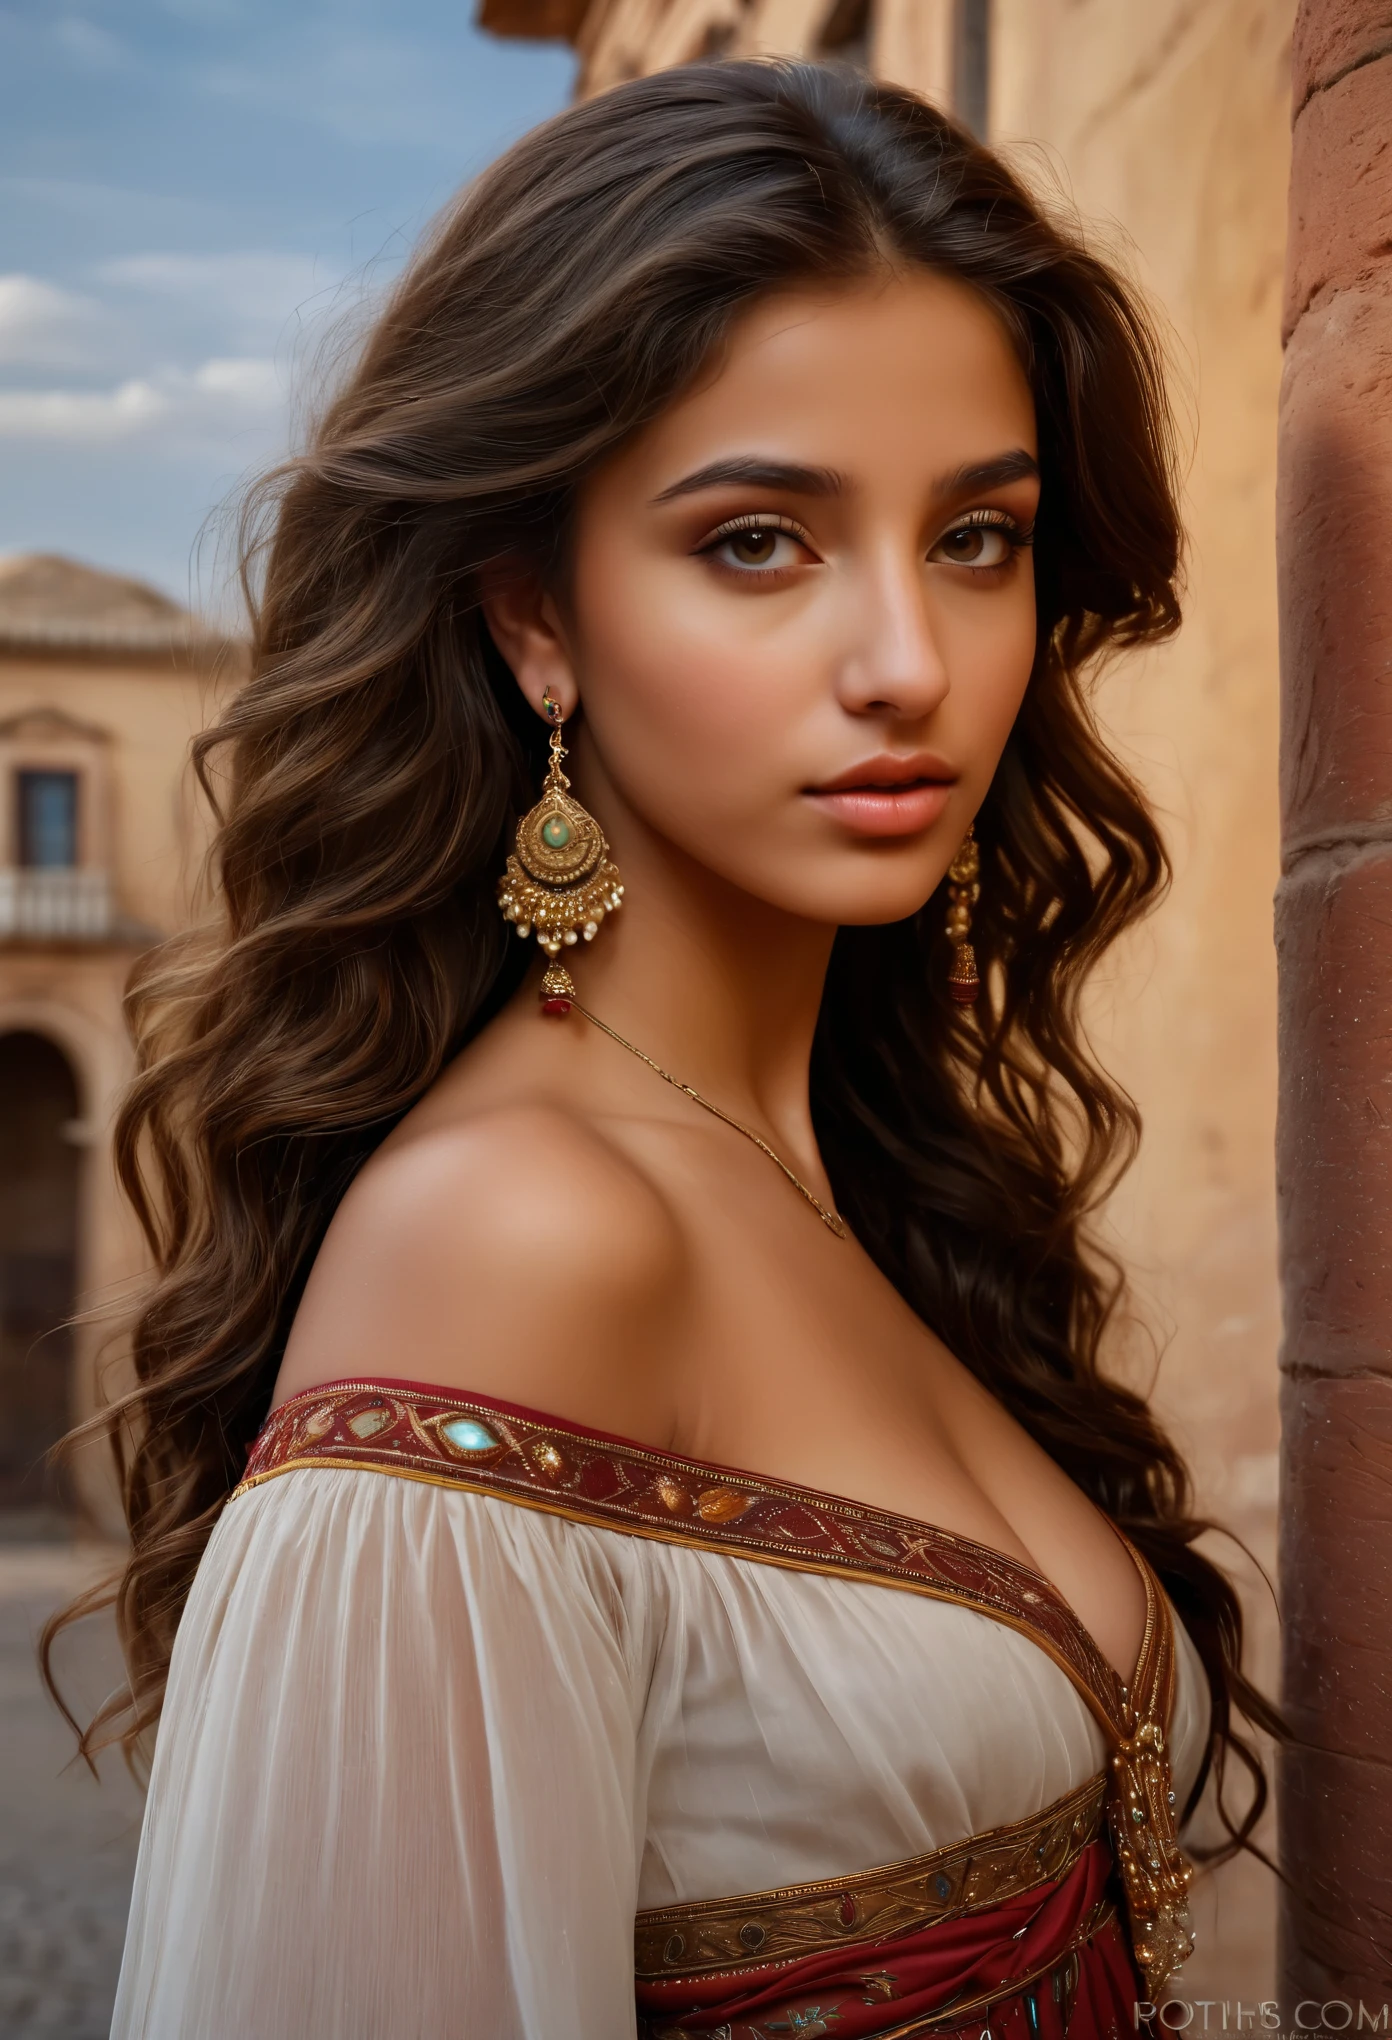 (best quality,highres,masterpiece:1.2),ultra-detailed,(realistic,photorealistic,photo-realistic:1.37),18-year-old Roma girl's portrait, exotic and exquisite beauty, oil painting, detailed facial features, deep eyes, luscious lips, long eyelashes, porcelain-like complexion, flowing dark hair, delicate features, vibrant colors, intricate jewelry, traditional dress, graceful posture, capturing the essence of Roma culture, natural lighting, mesmerizing gaze, enchanting atmosphere.